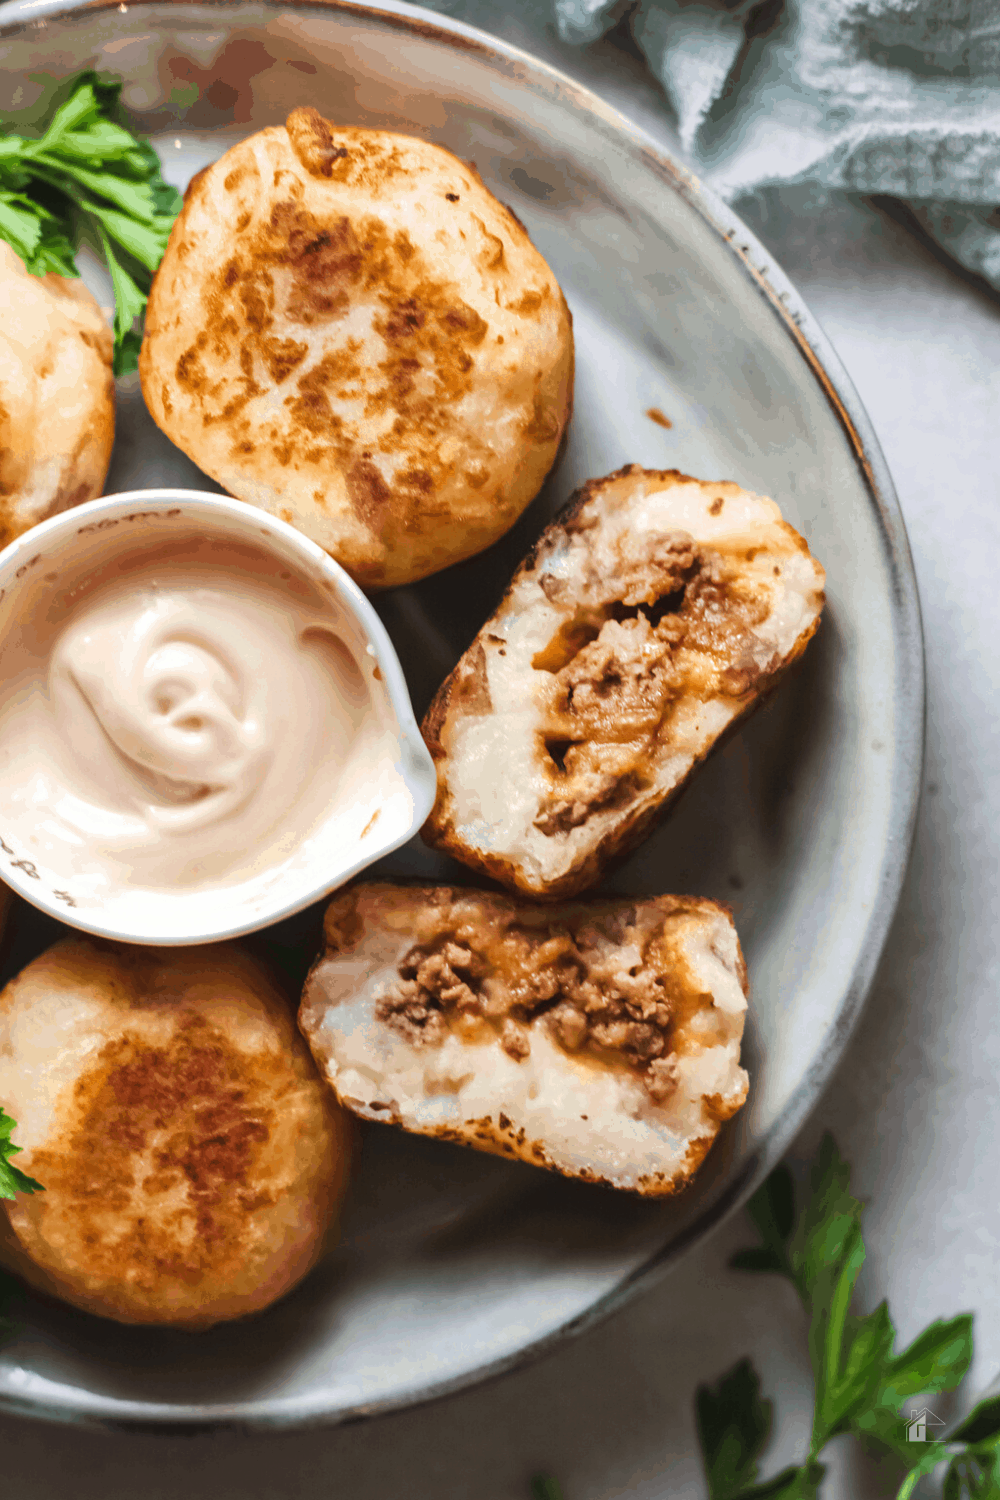 Rellenos de papa, stuffed mashed potato, is a fried crispy potato ball filled with ground beef (picadillo) that you are going to love! via @mystayathome